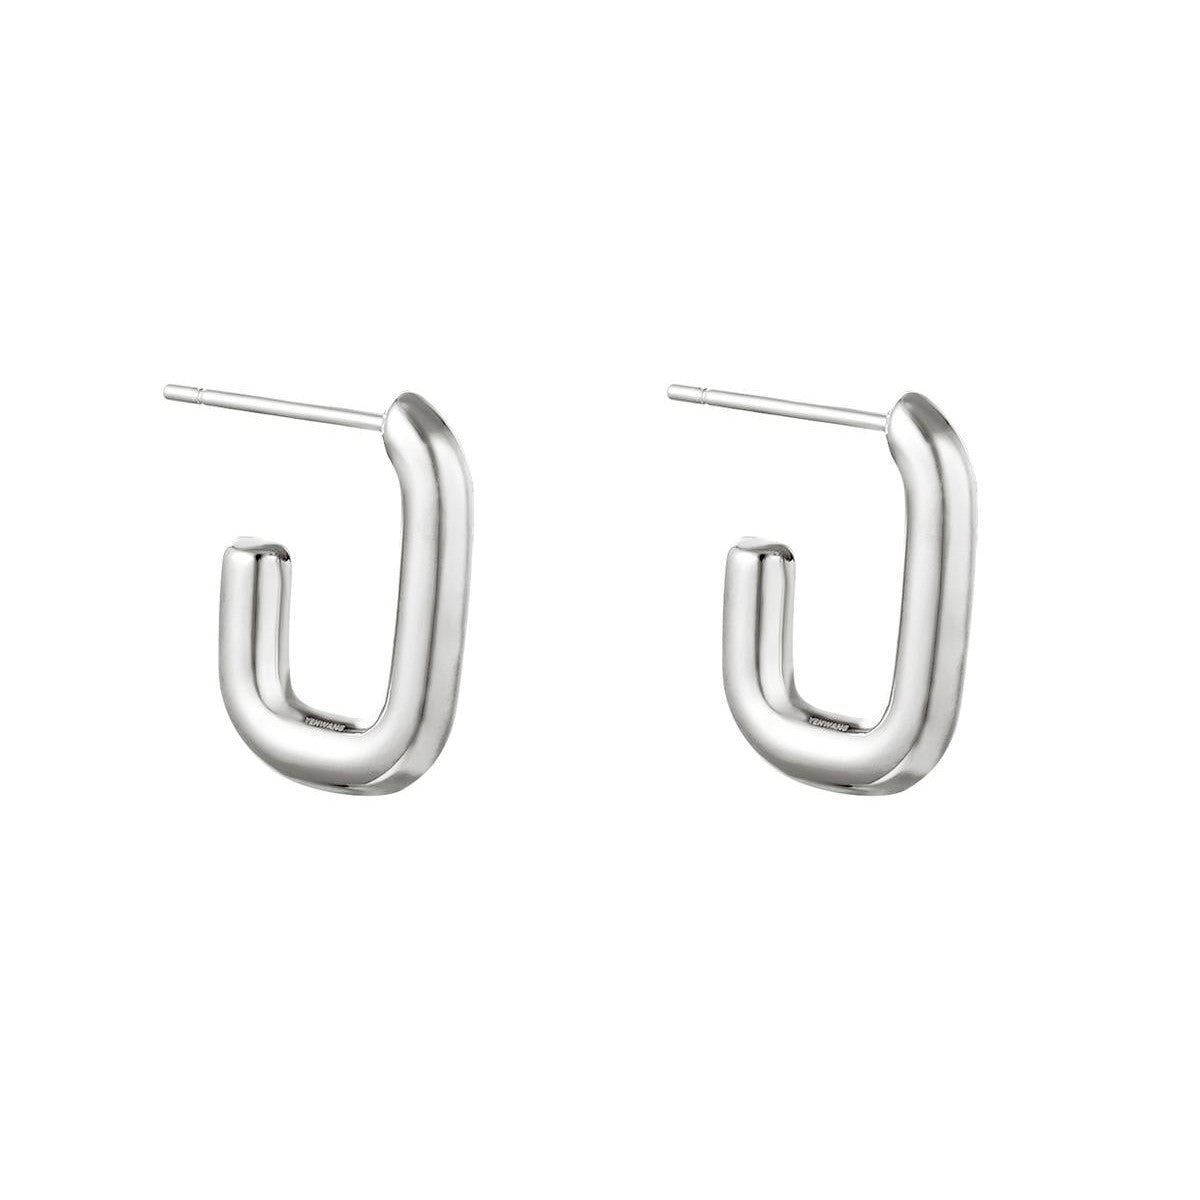 Small square hoops